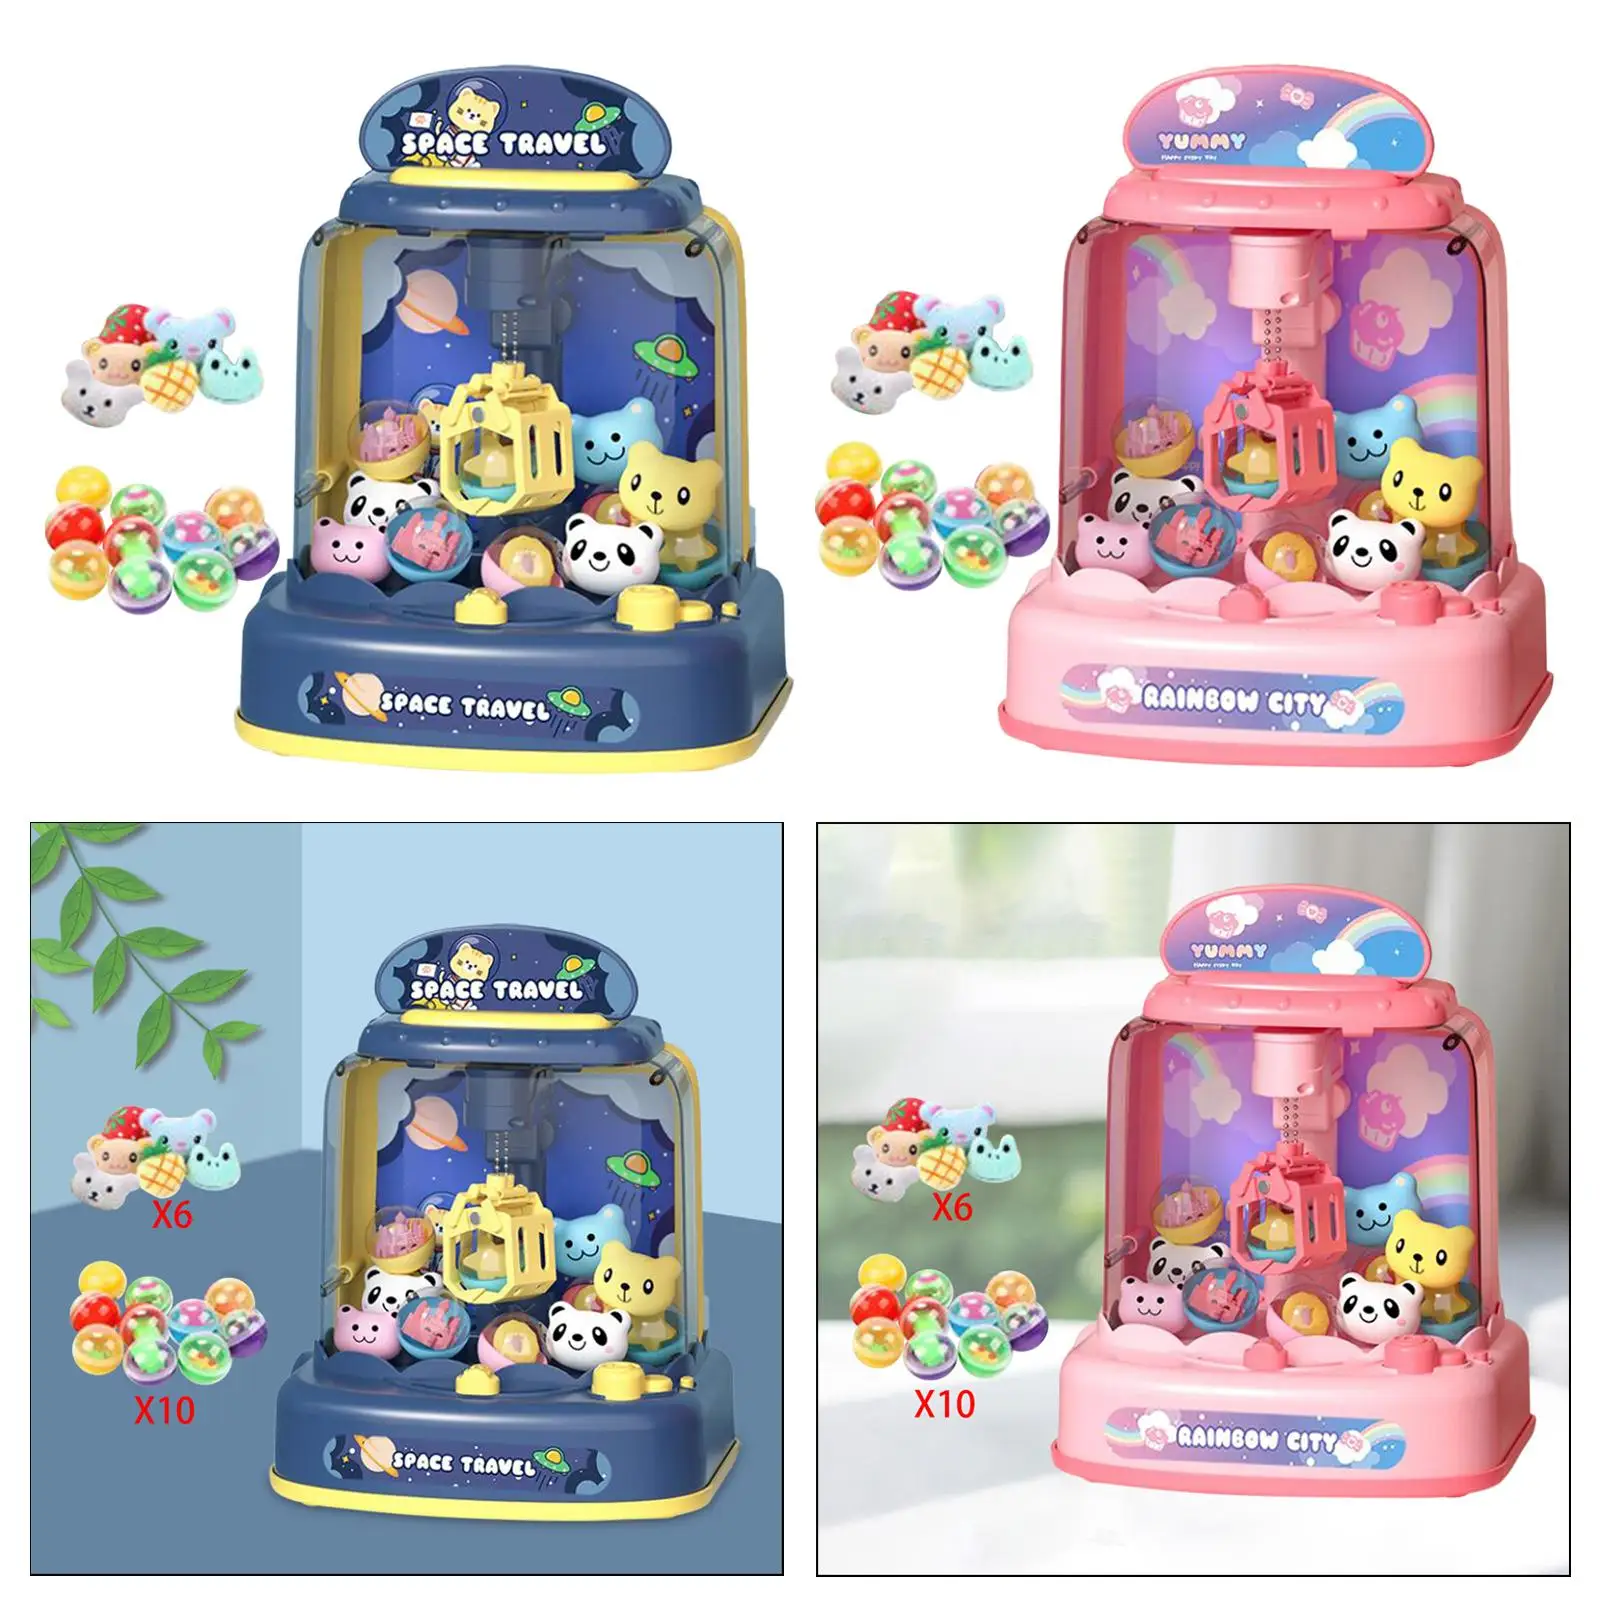 Kids Claw Machine Party Favors Indoor Toy Arcade Claw Game Doll Machine with Sounds for Girls Kids Boys Children Birthday Gifts